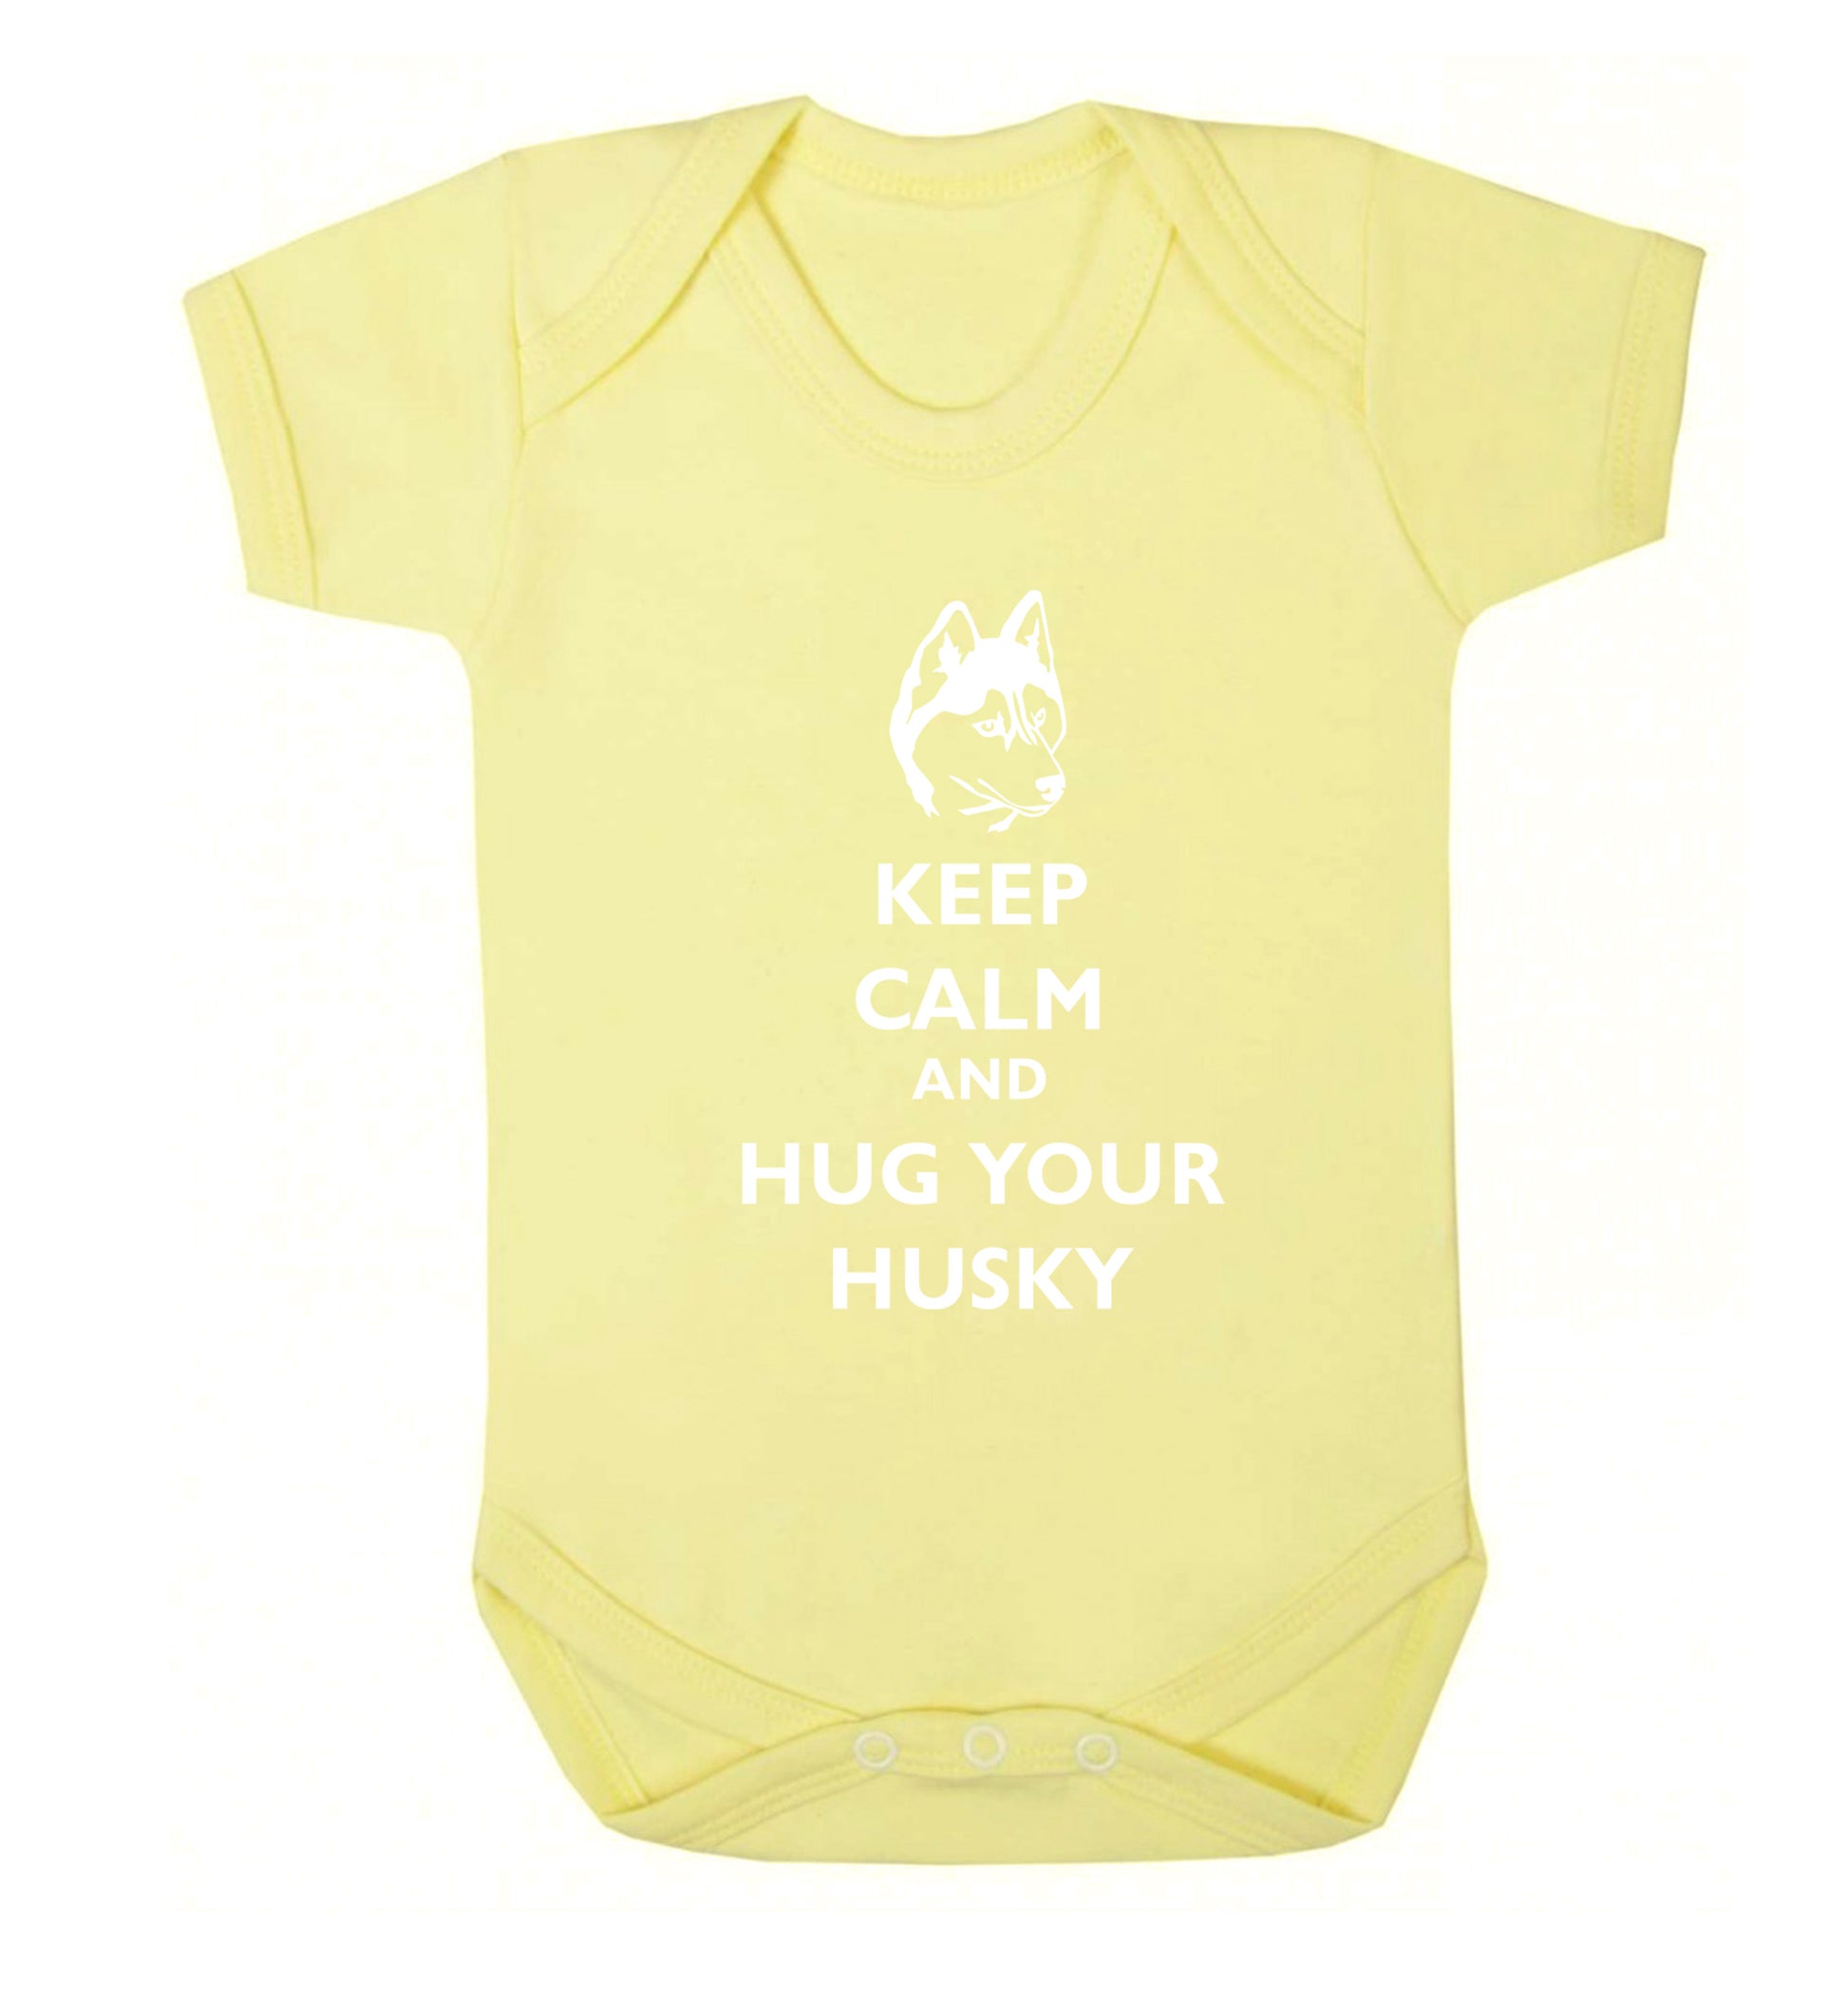 Keep calm and hug your husky Baby Vest pale yellow 18-24 months